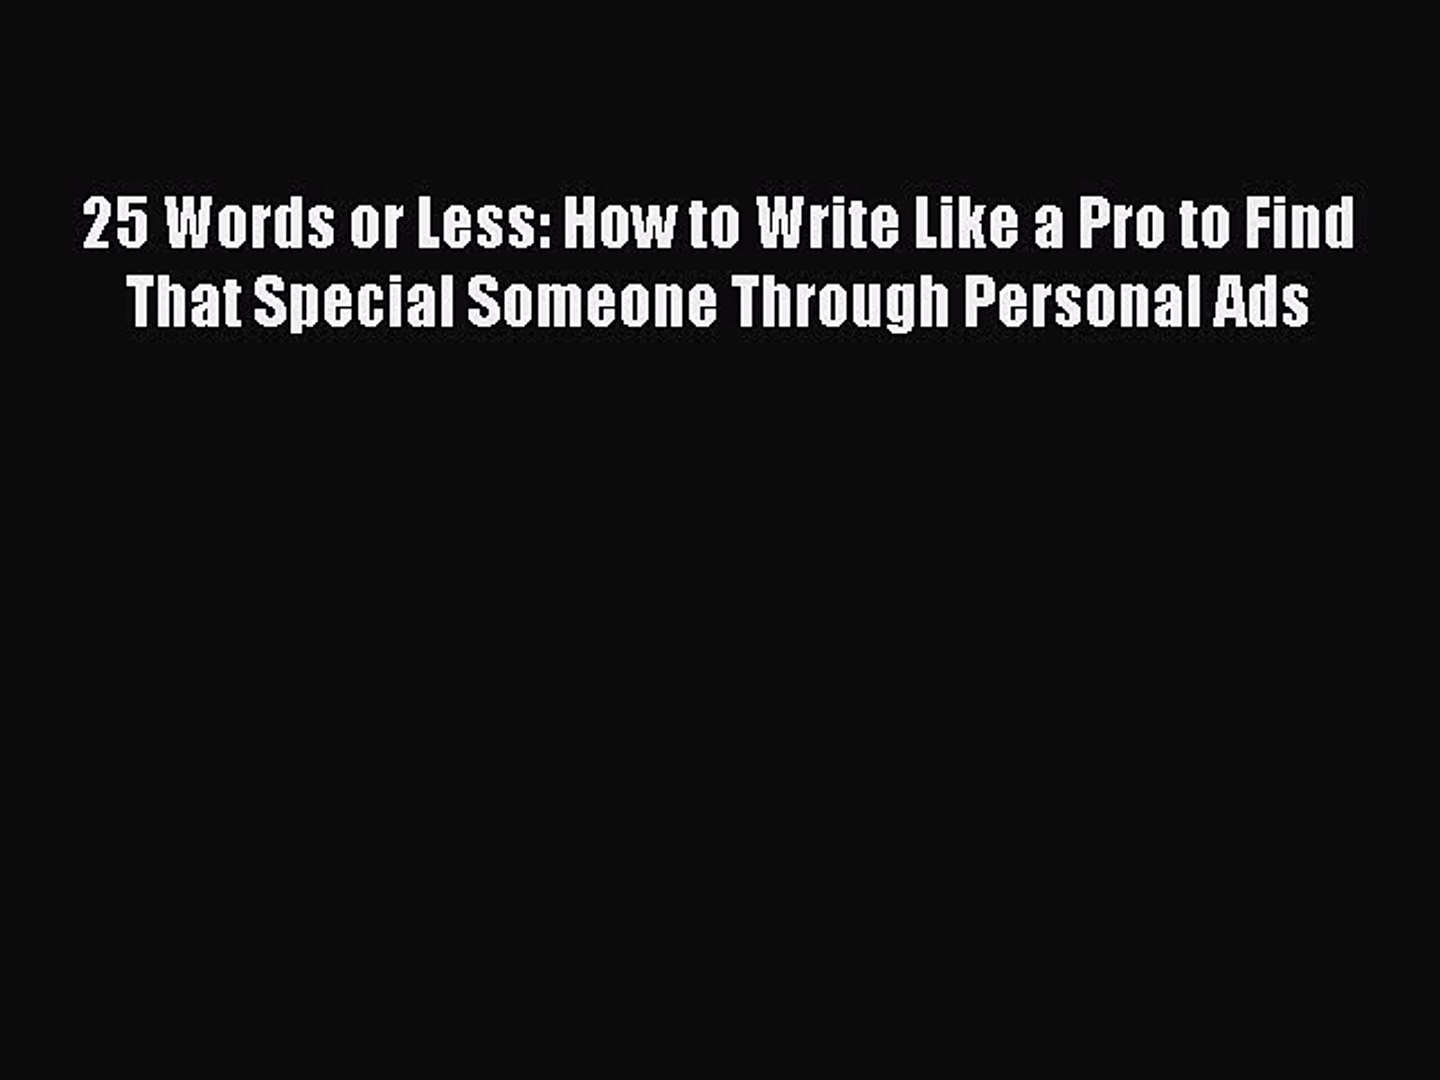 Read 5 Words or Less: How to Write Like a Pro to Find That